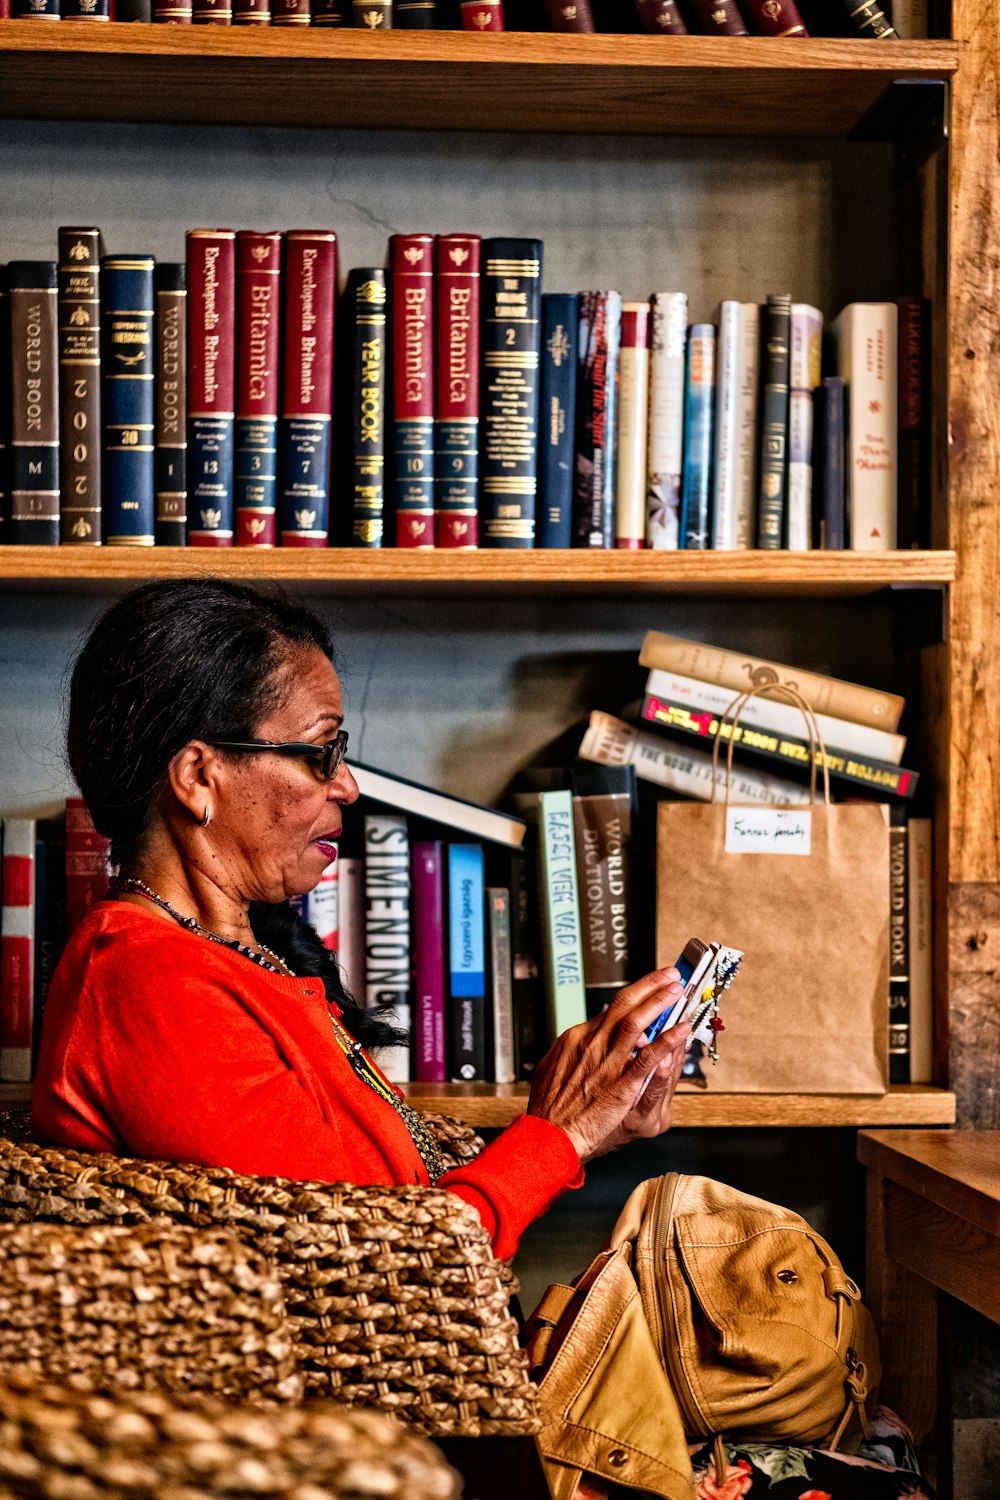 woman sitting on chair using Android smartphone near bookshelf